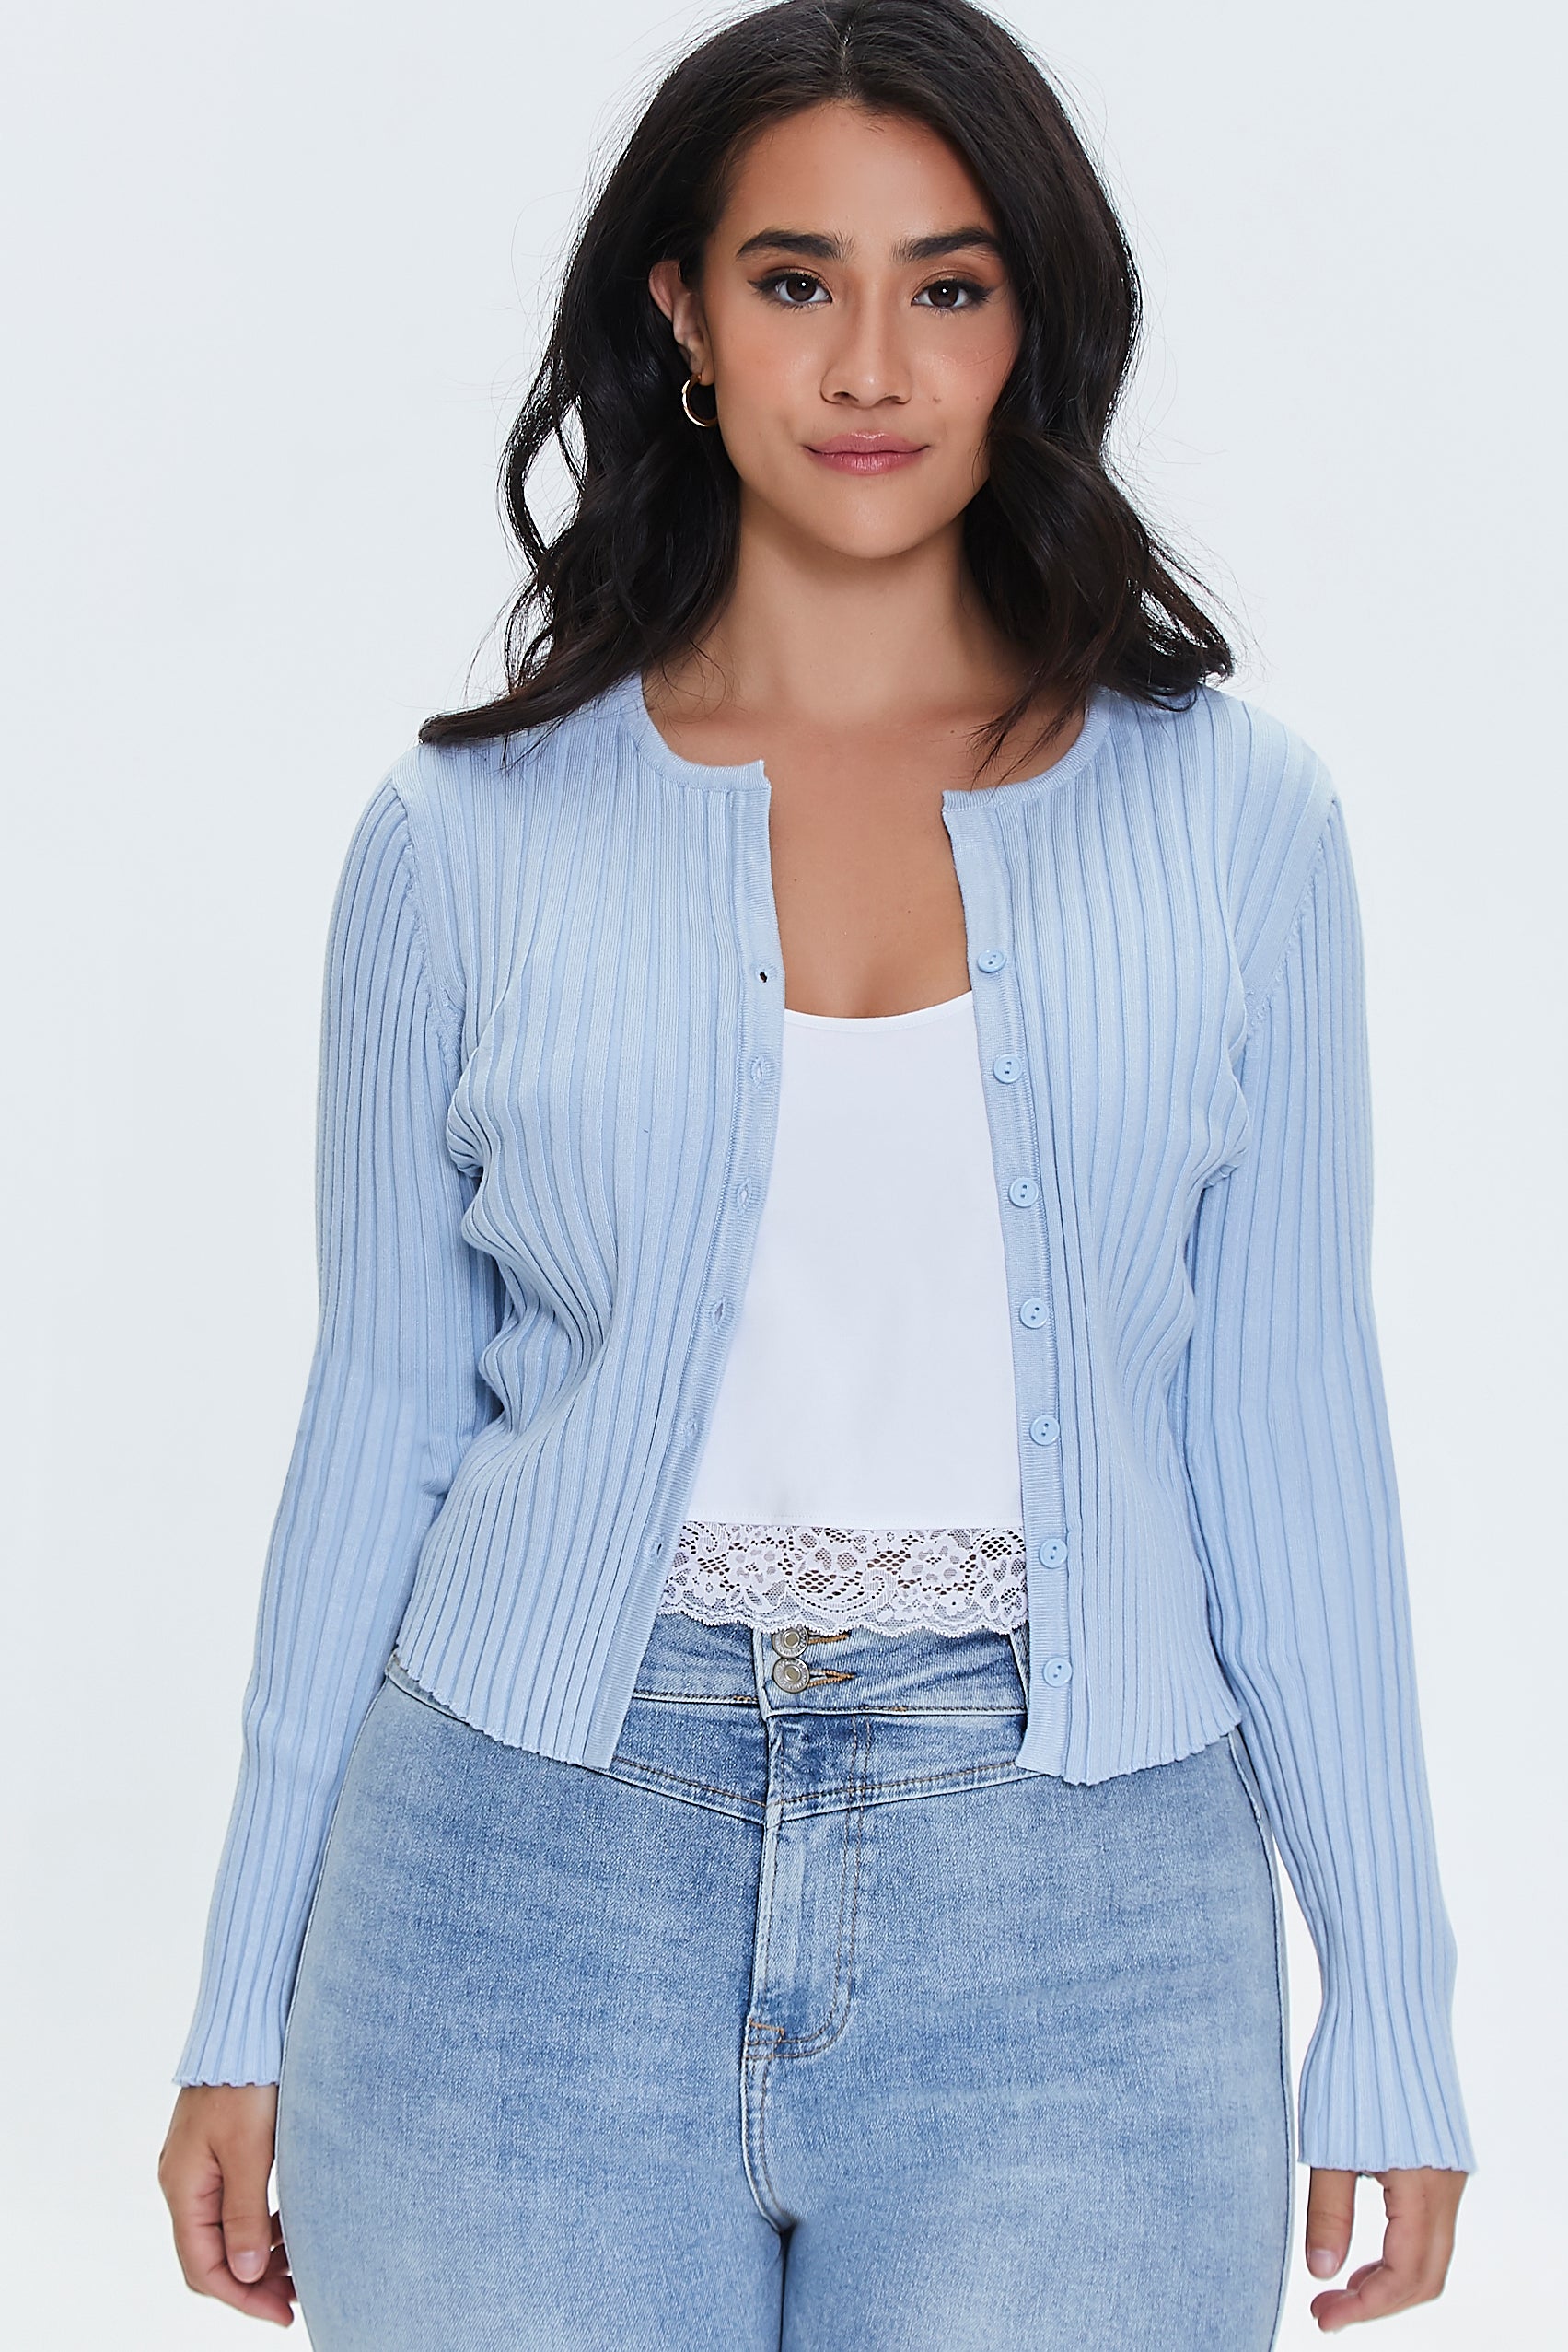 Skyblue Plus Size Ribbed Knit Cardigan Sweater 